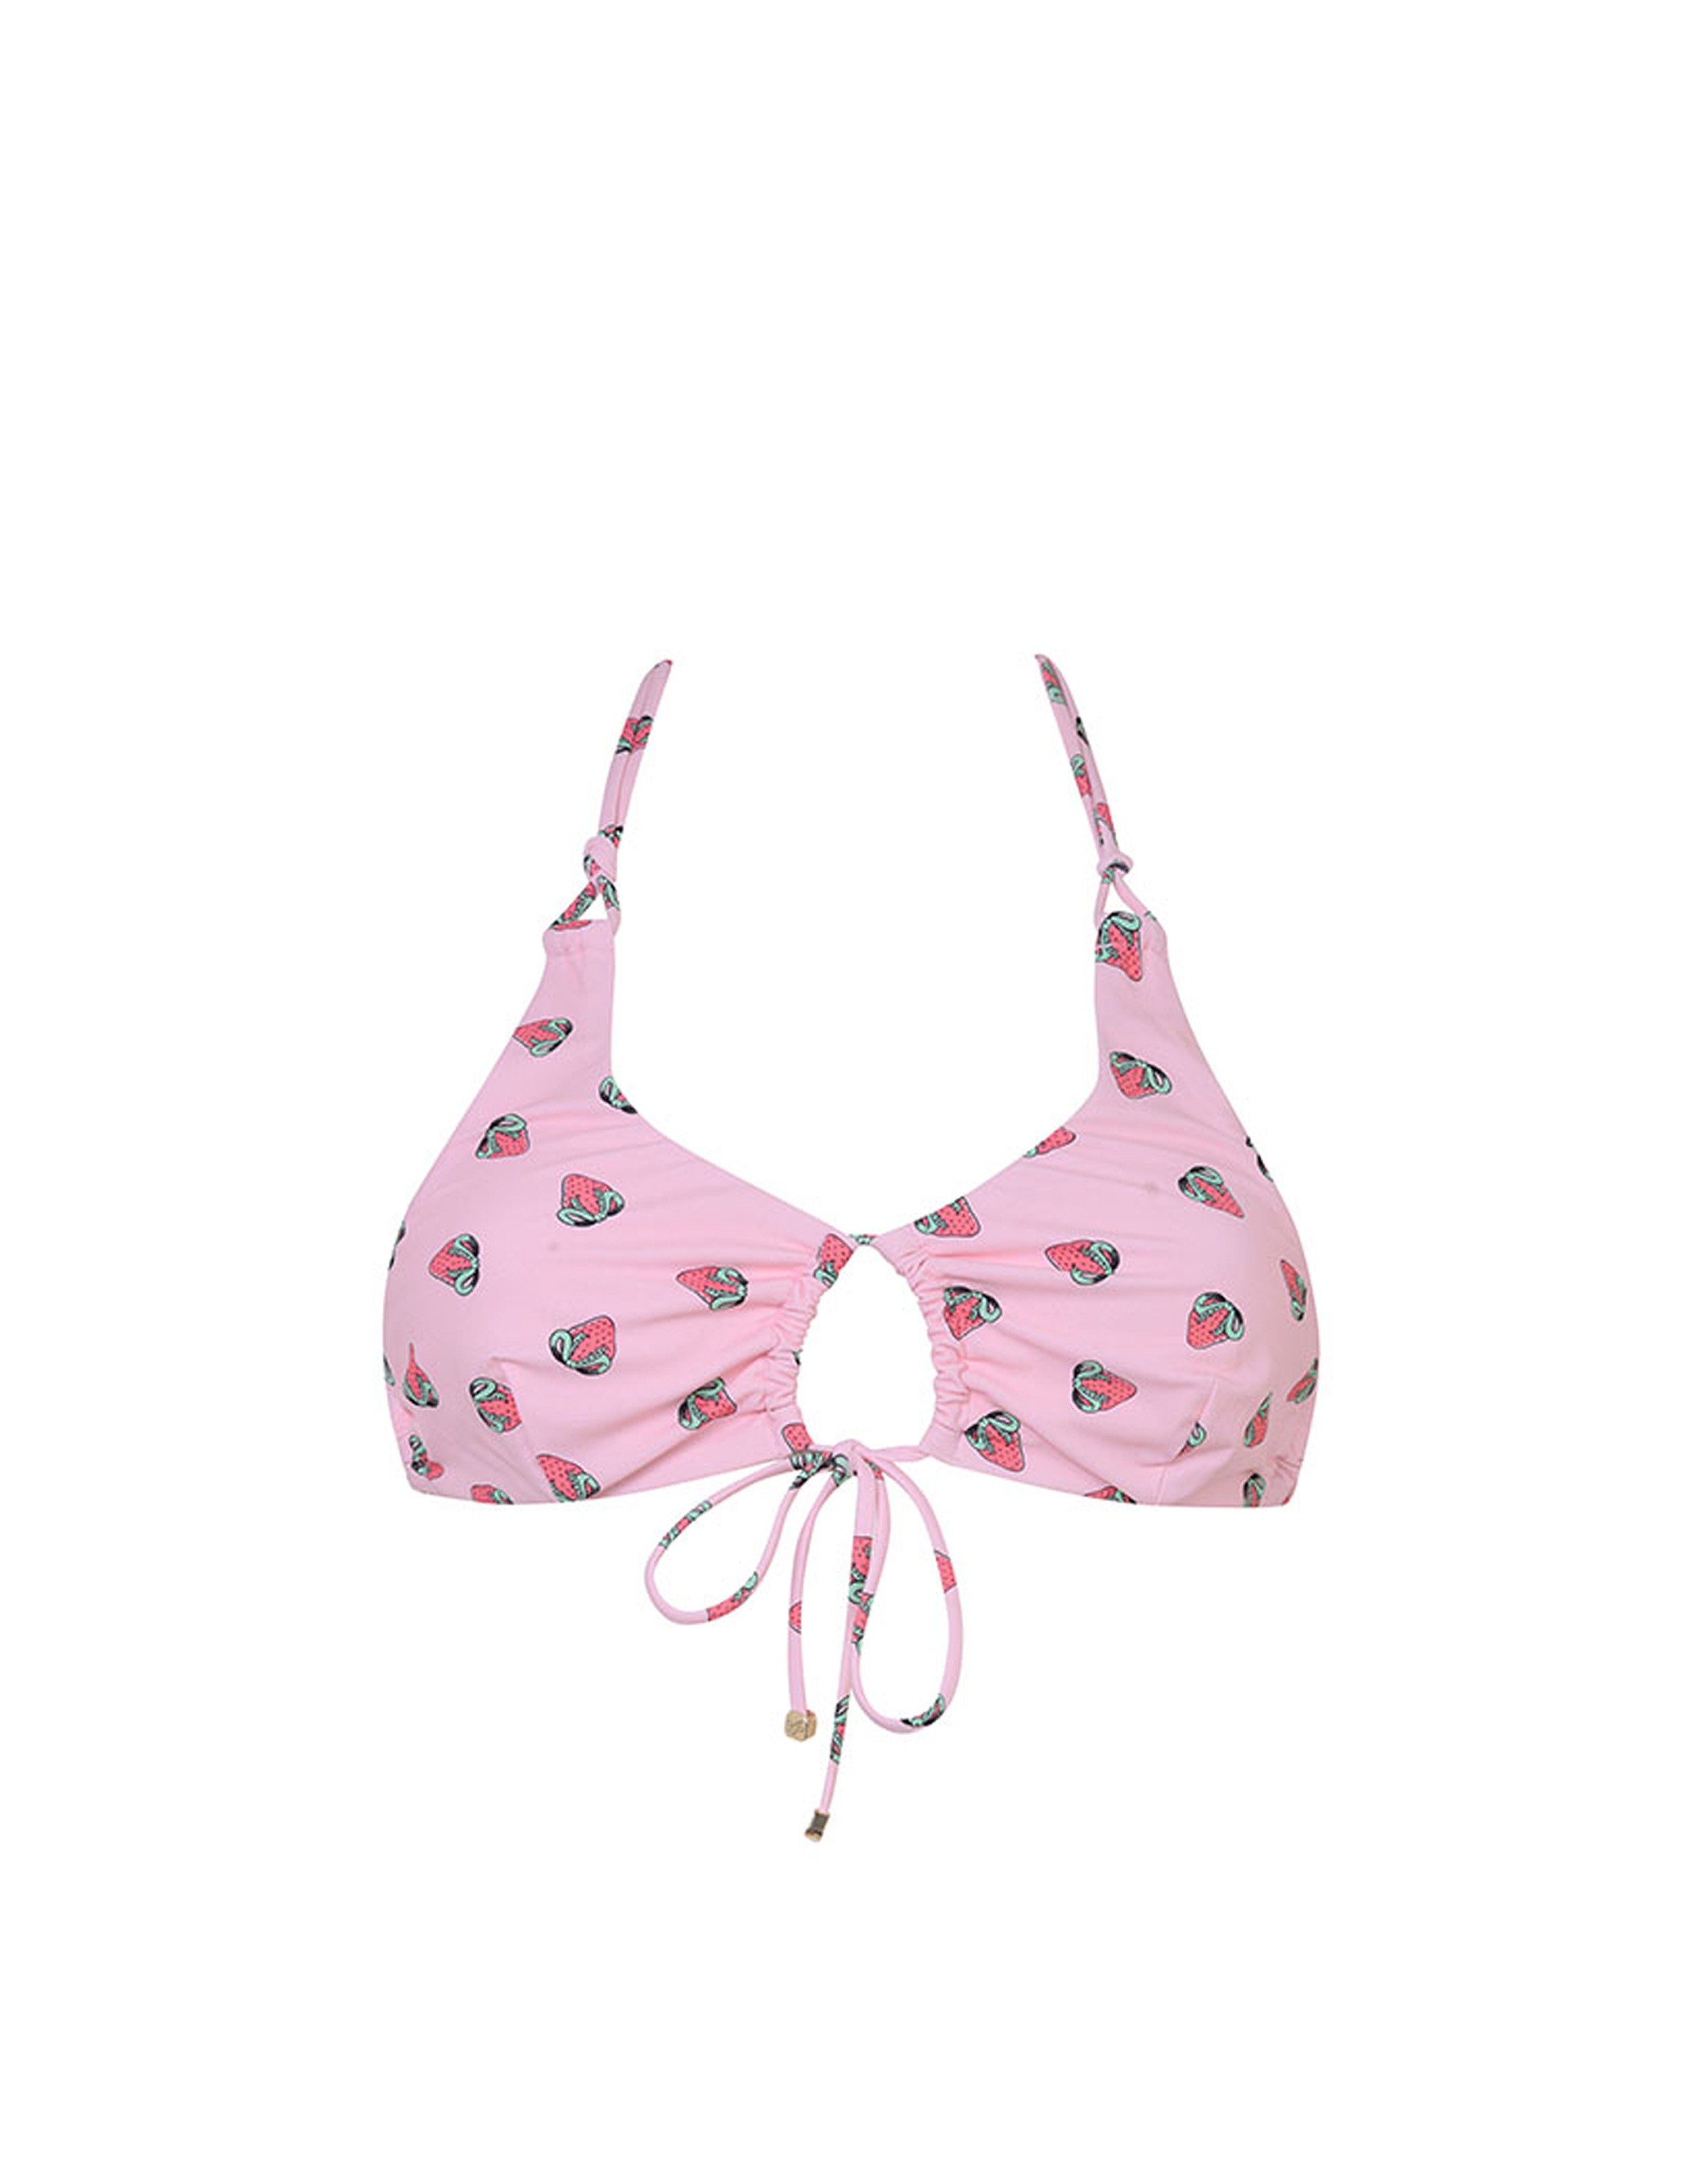 Fraise Bikini Top in Pink | Agent Provocateur Outlet